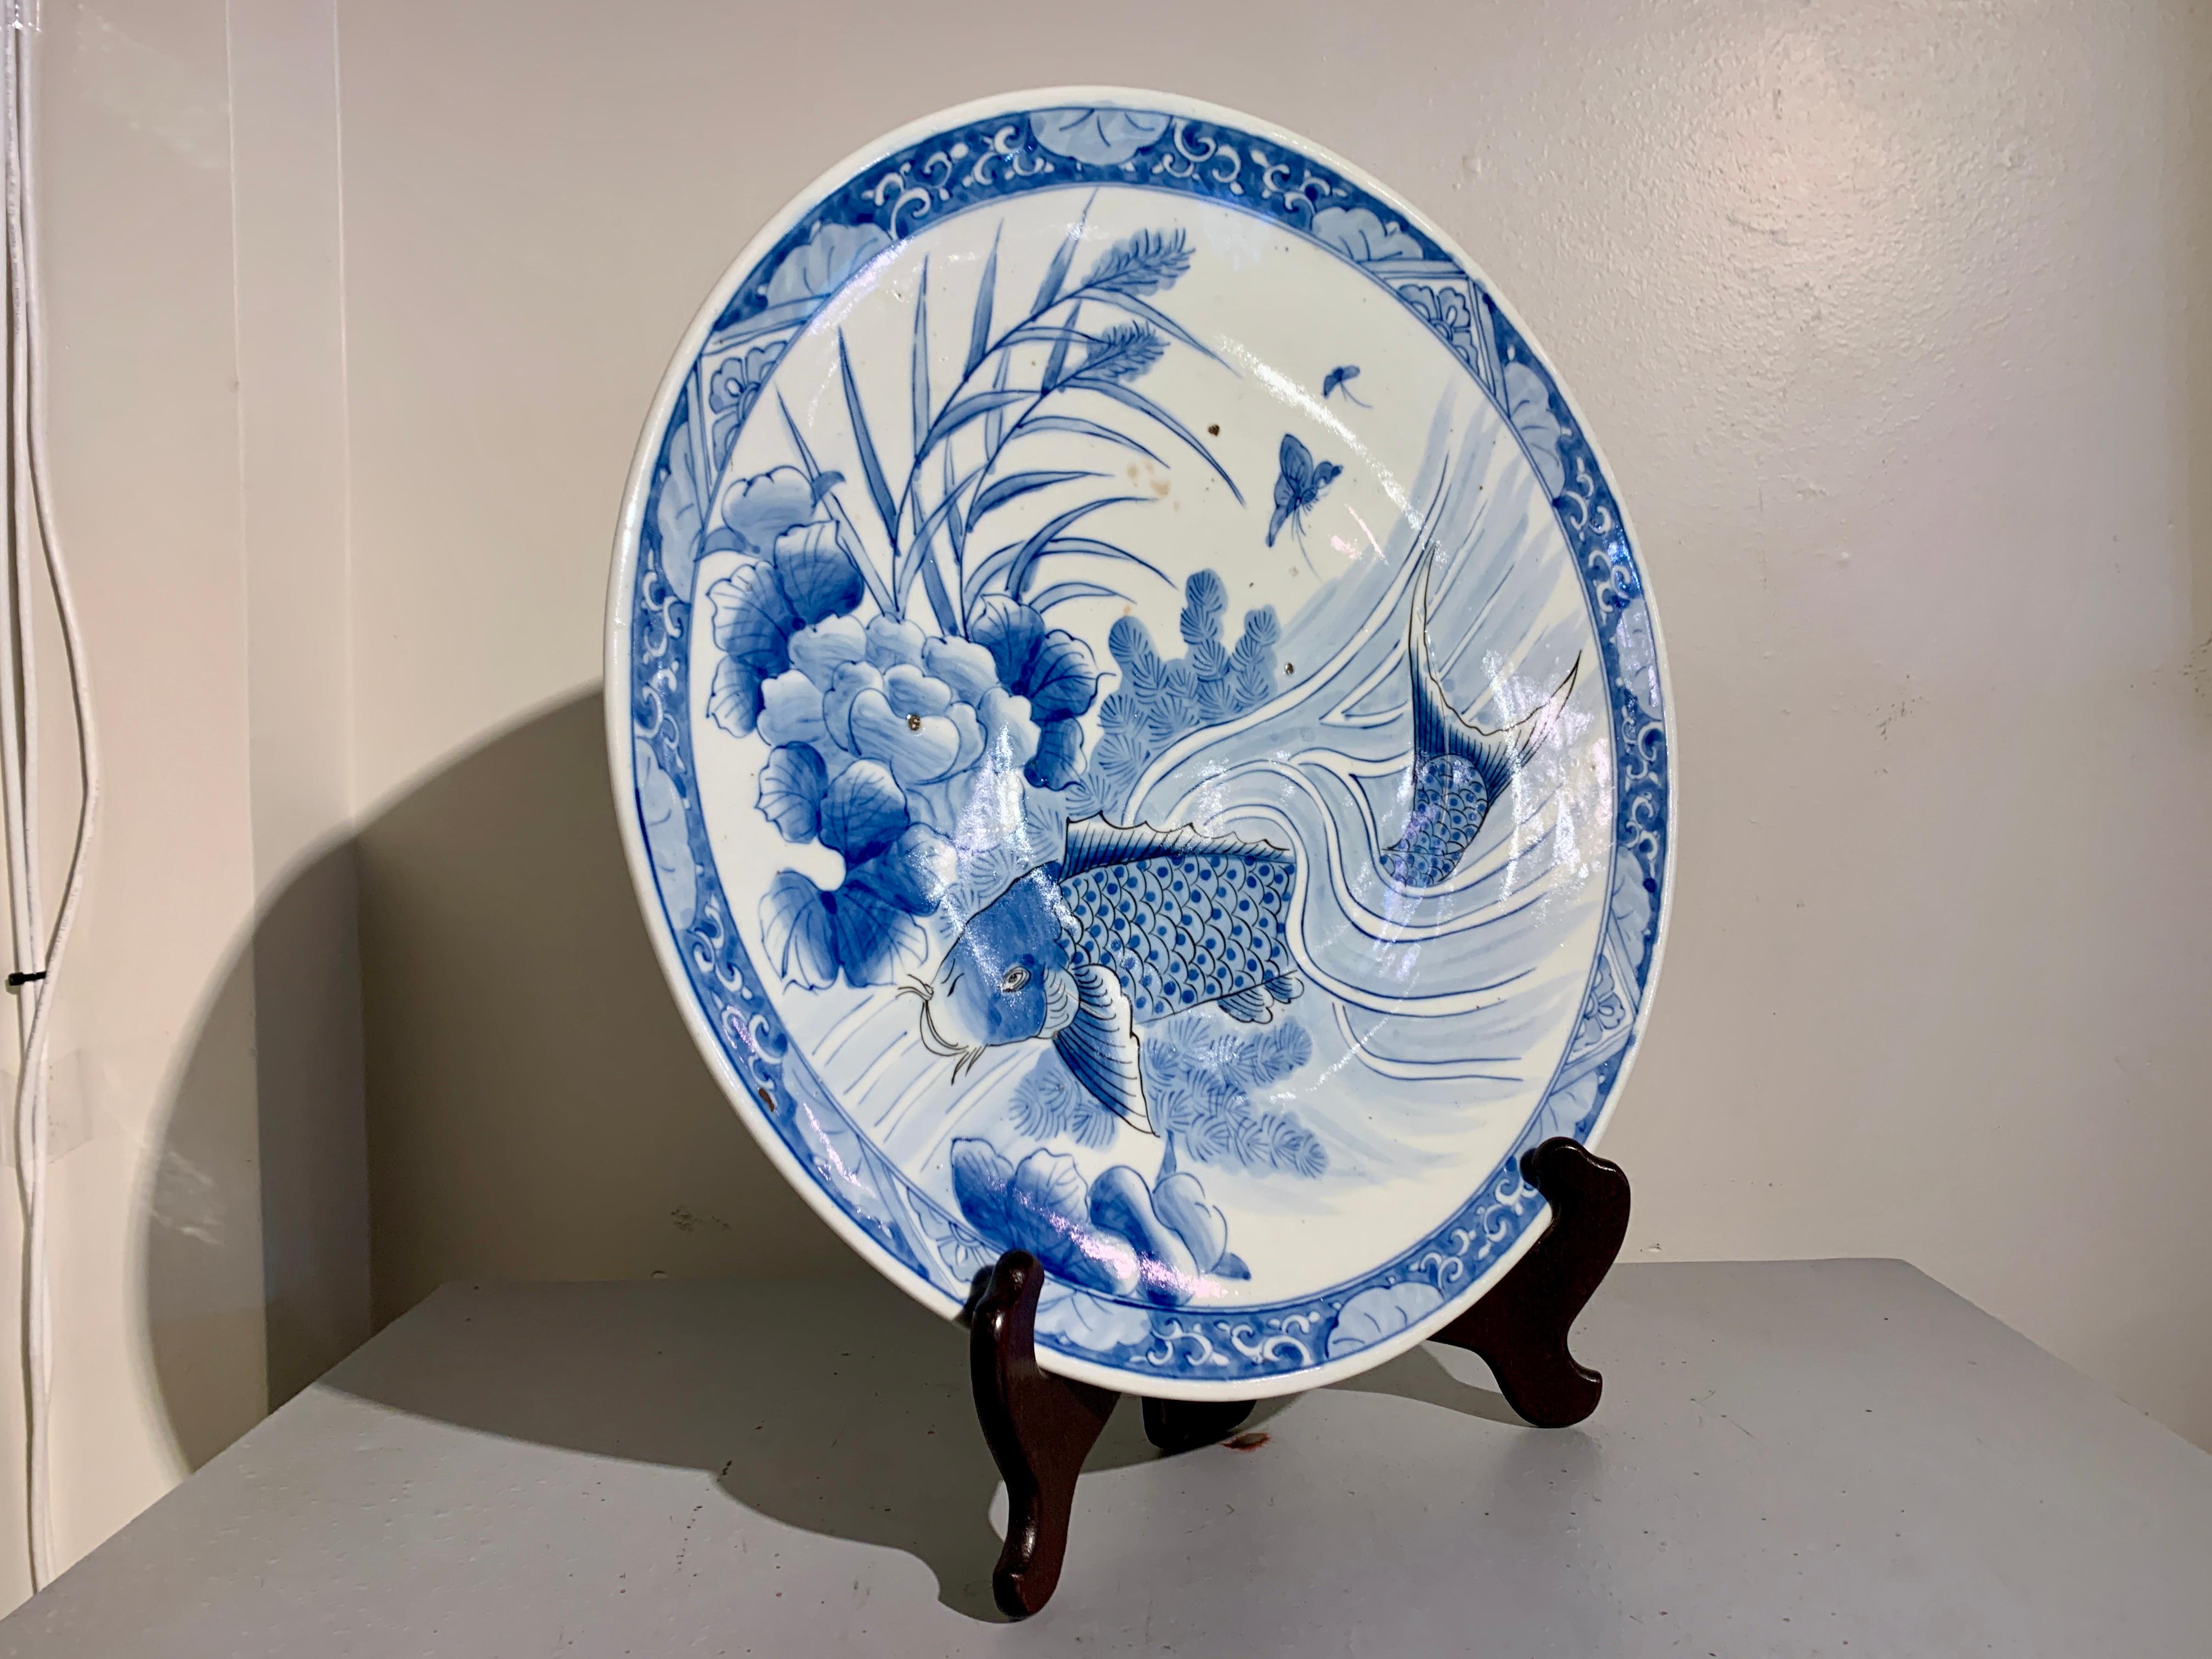 A large Japanese blue and white decorated Arita porcelain charger, Edo Period, early 19th century, Japan.

The large and shallow blue and white Arita porcelain charger measures 18 7/8